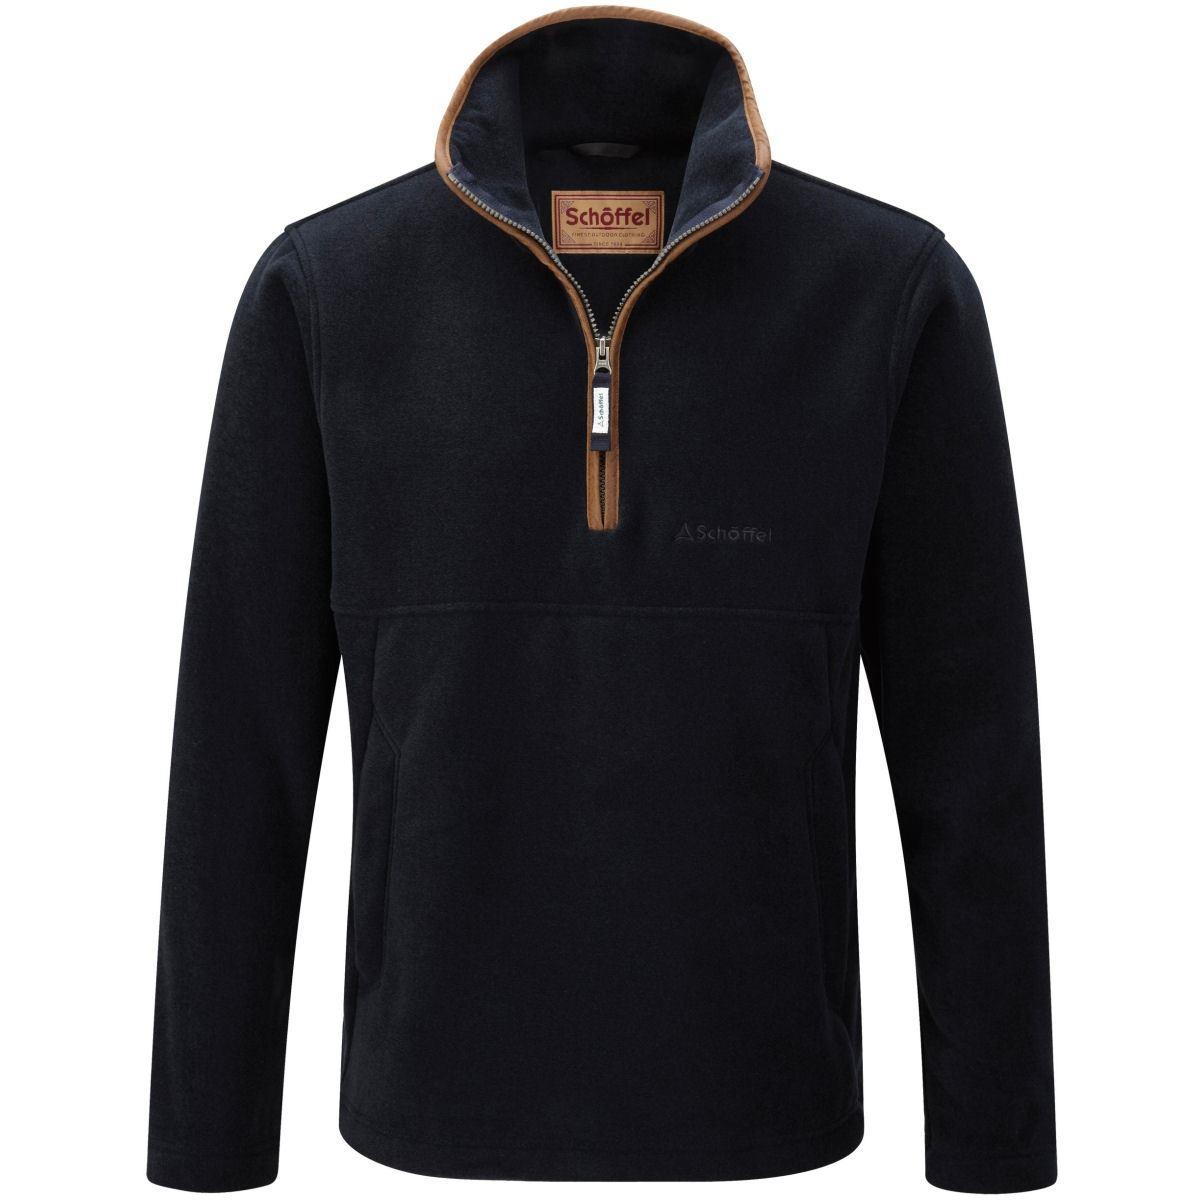 What are the styling options for the Schoffel quarter zip fleece?